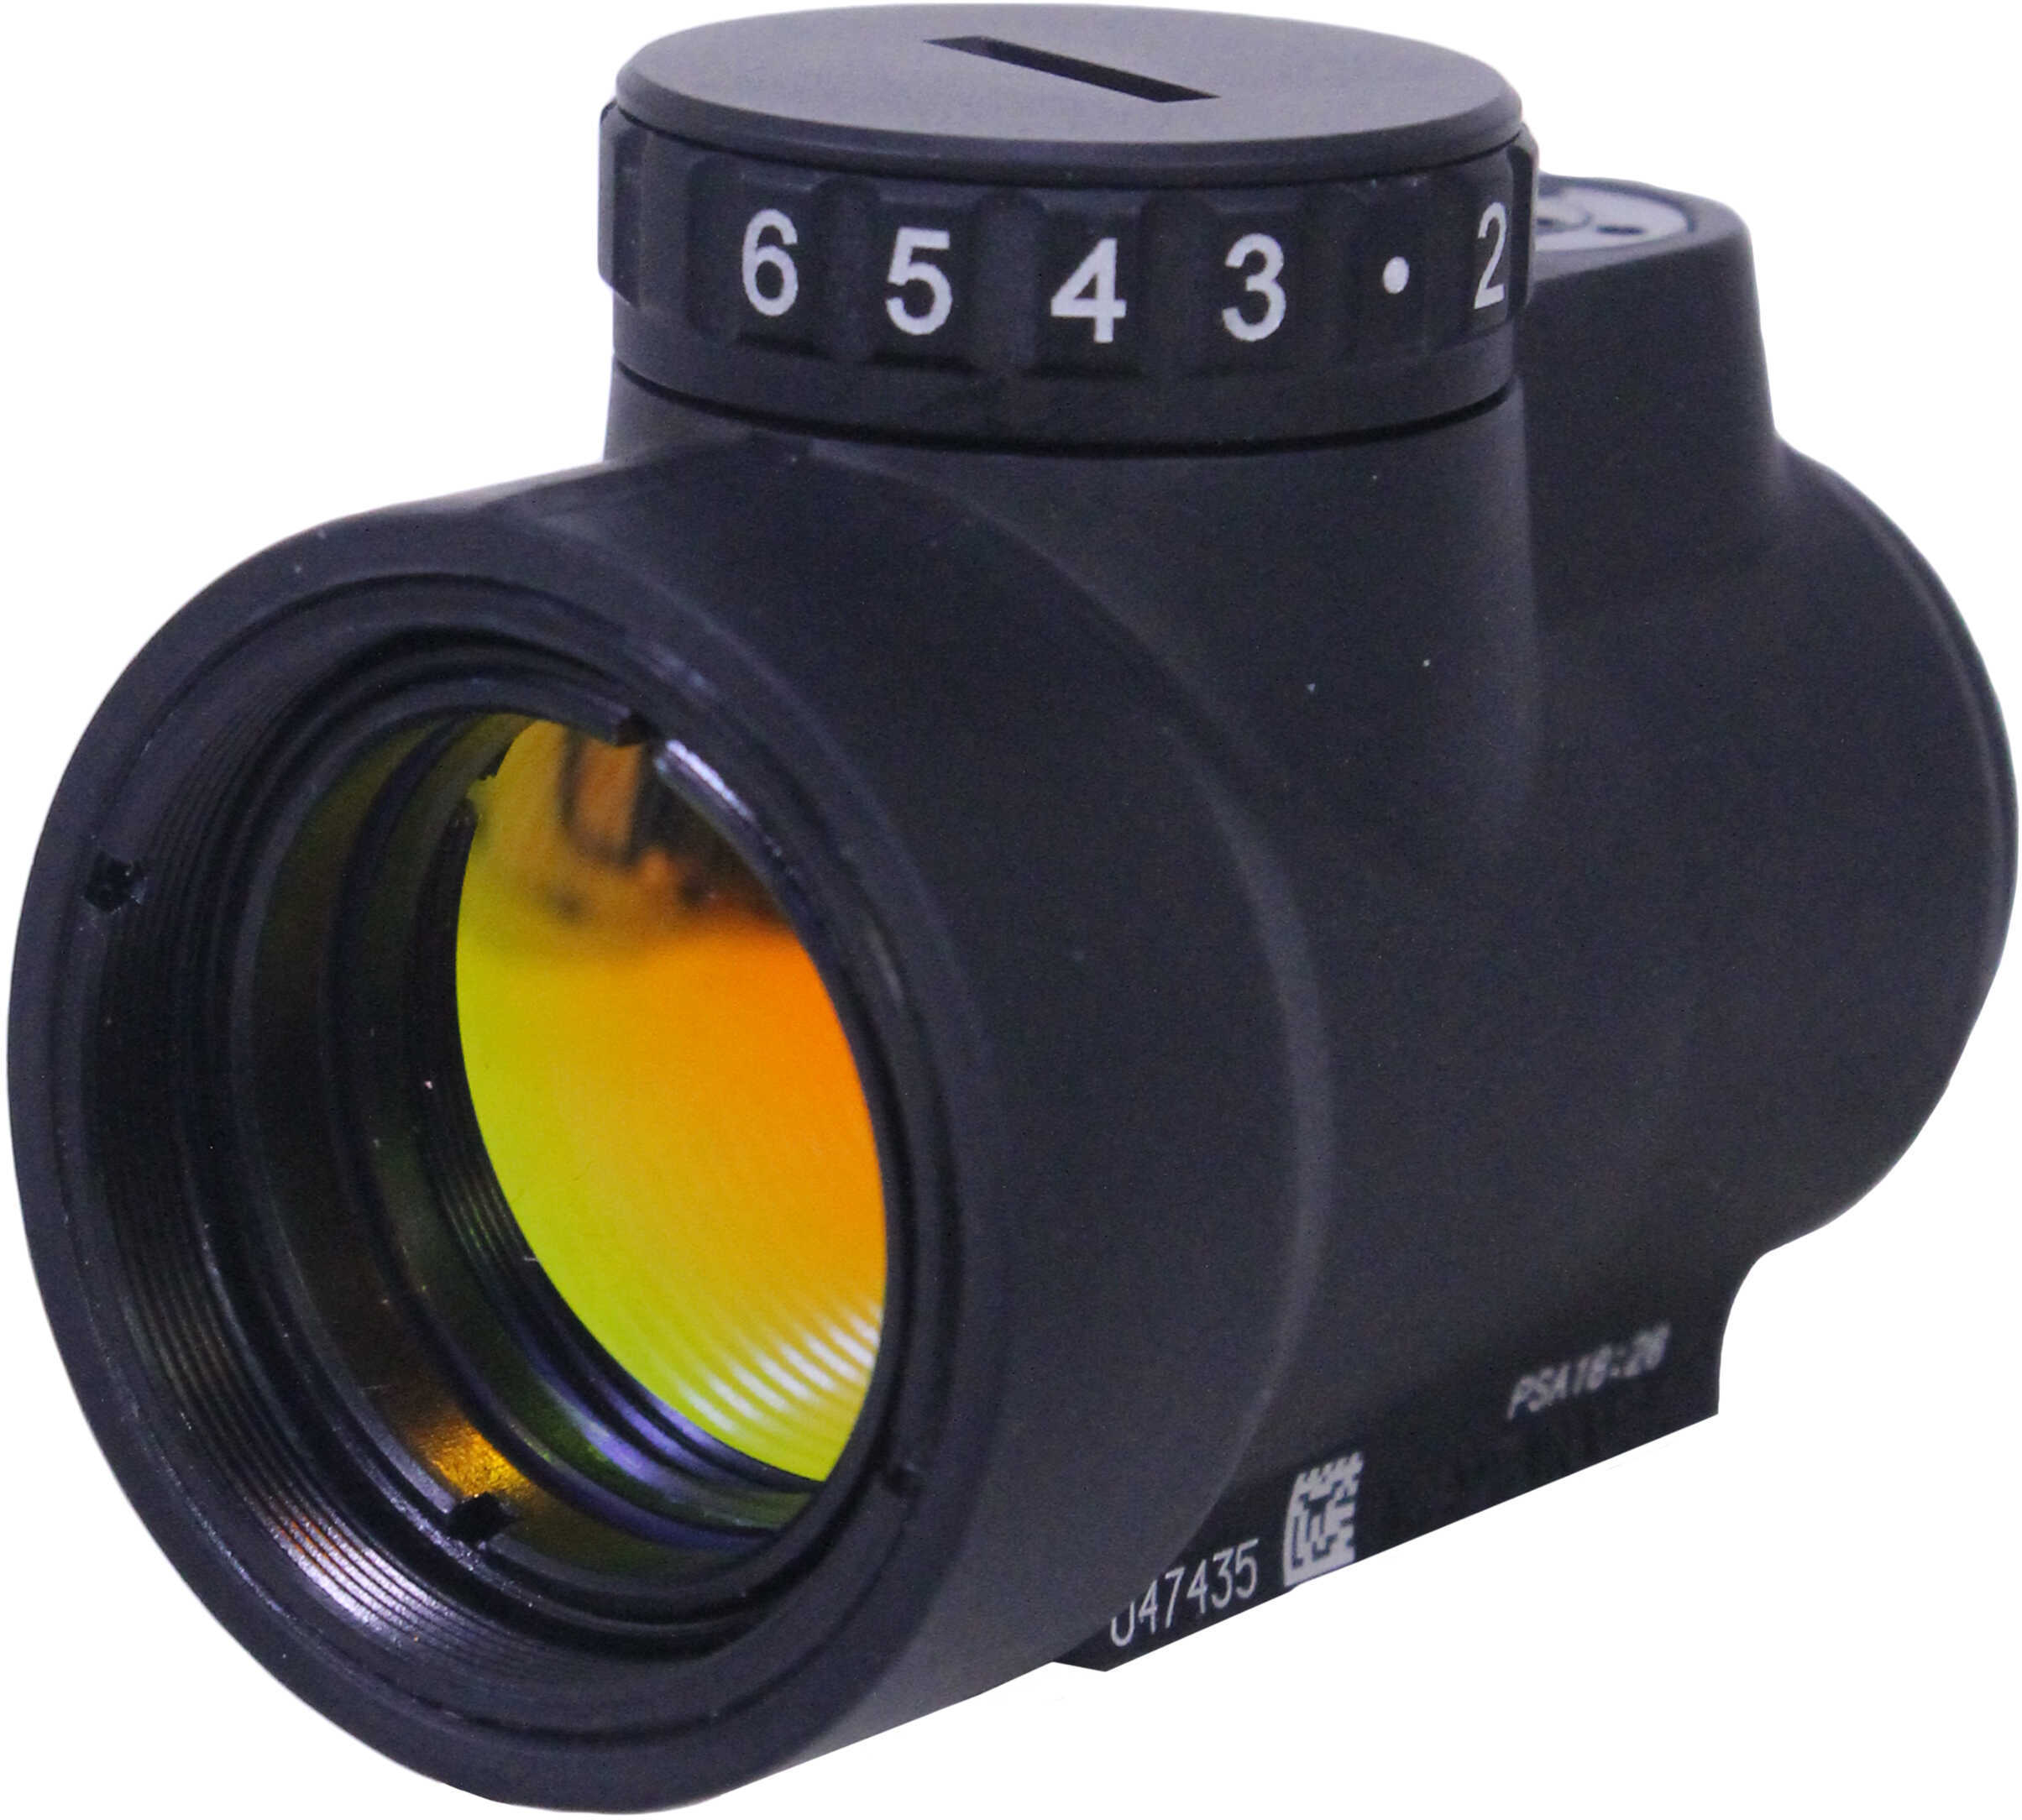 Trijicon MRO 2.0 MOA Adjustable Red Dot Sight 1x25mm with Adustable Rear Low Md: MRO-C-2200011